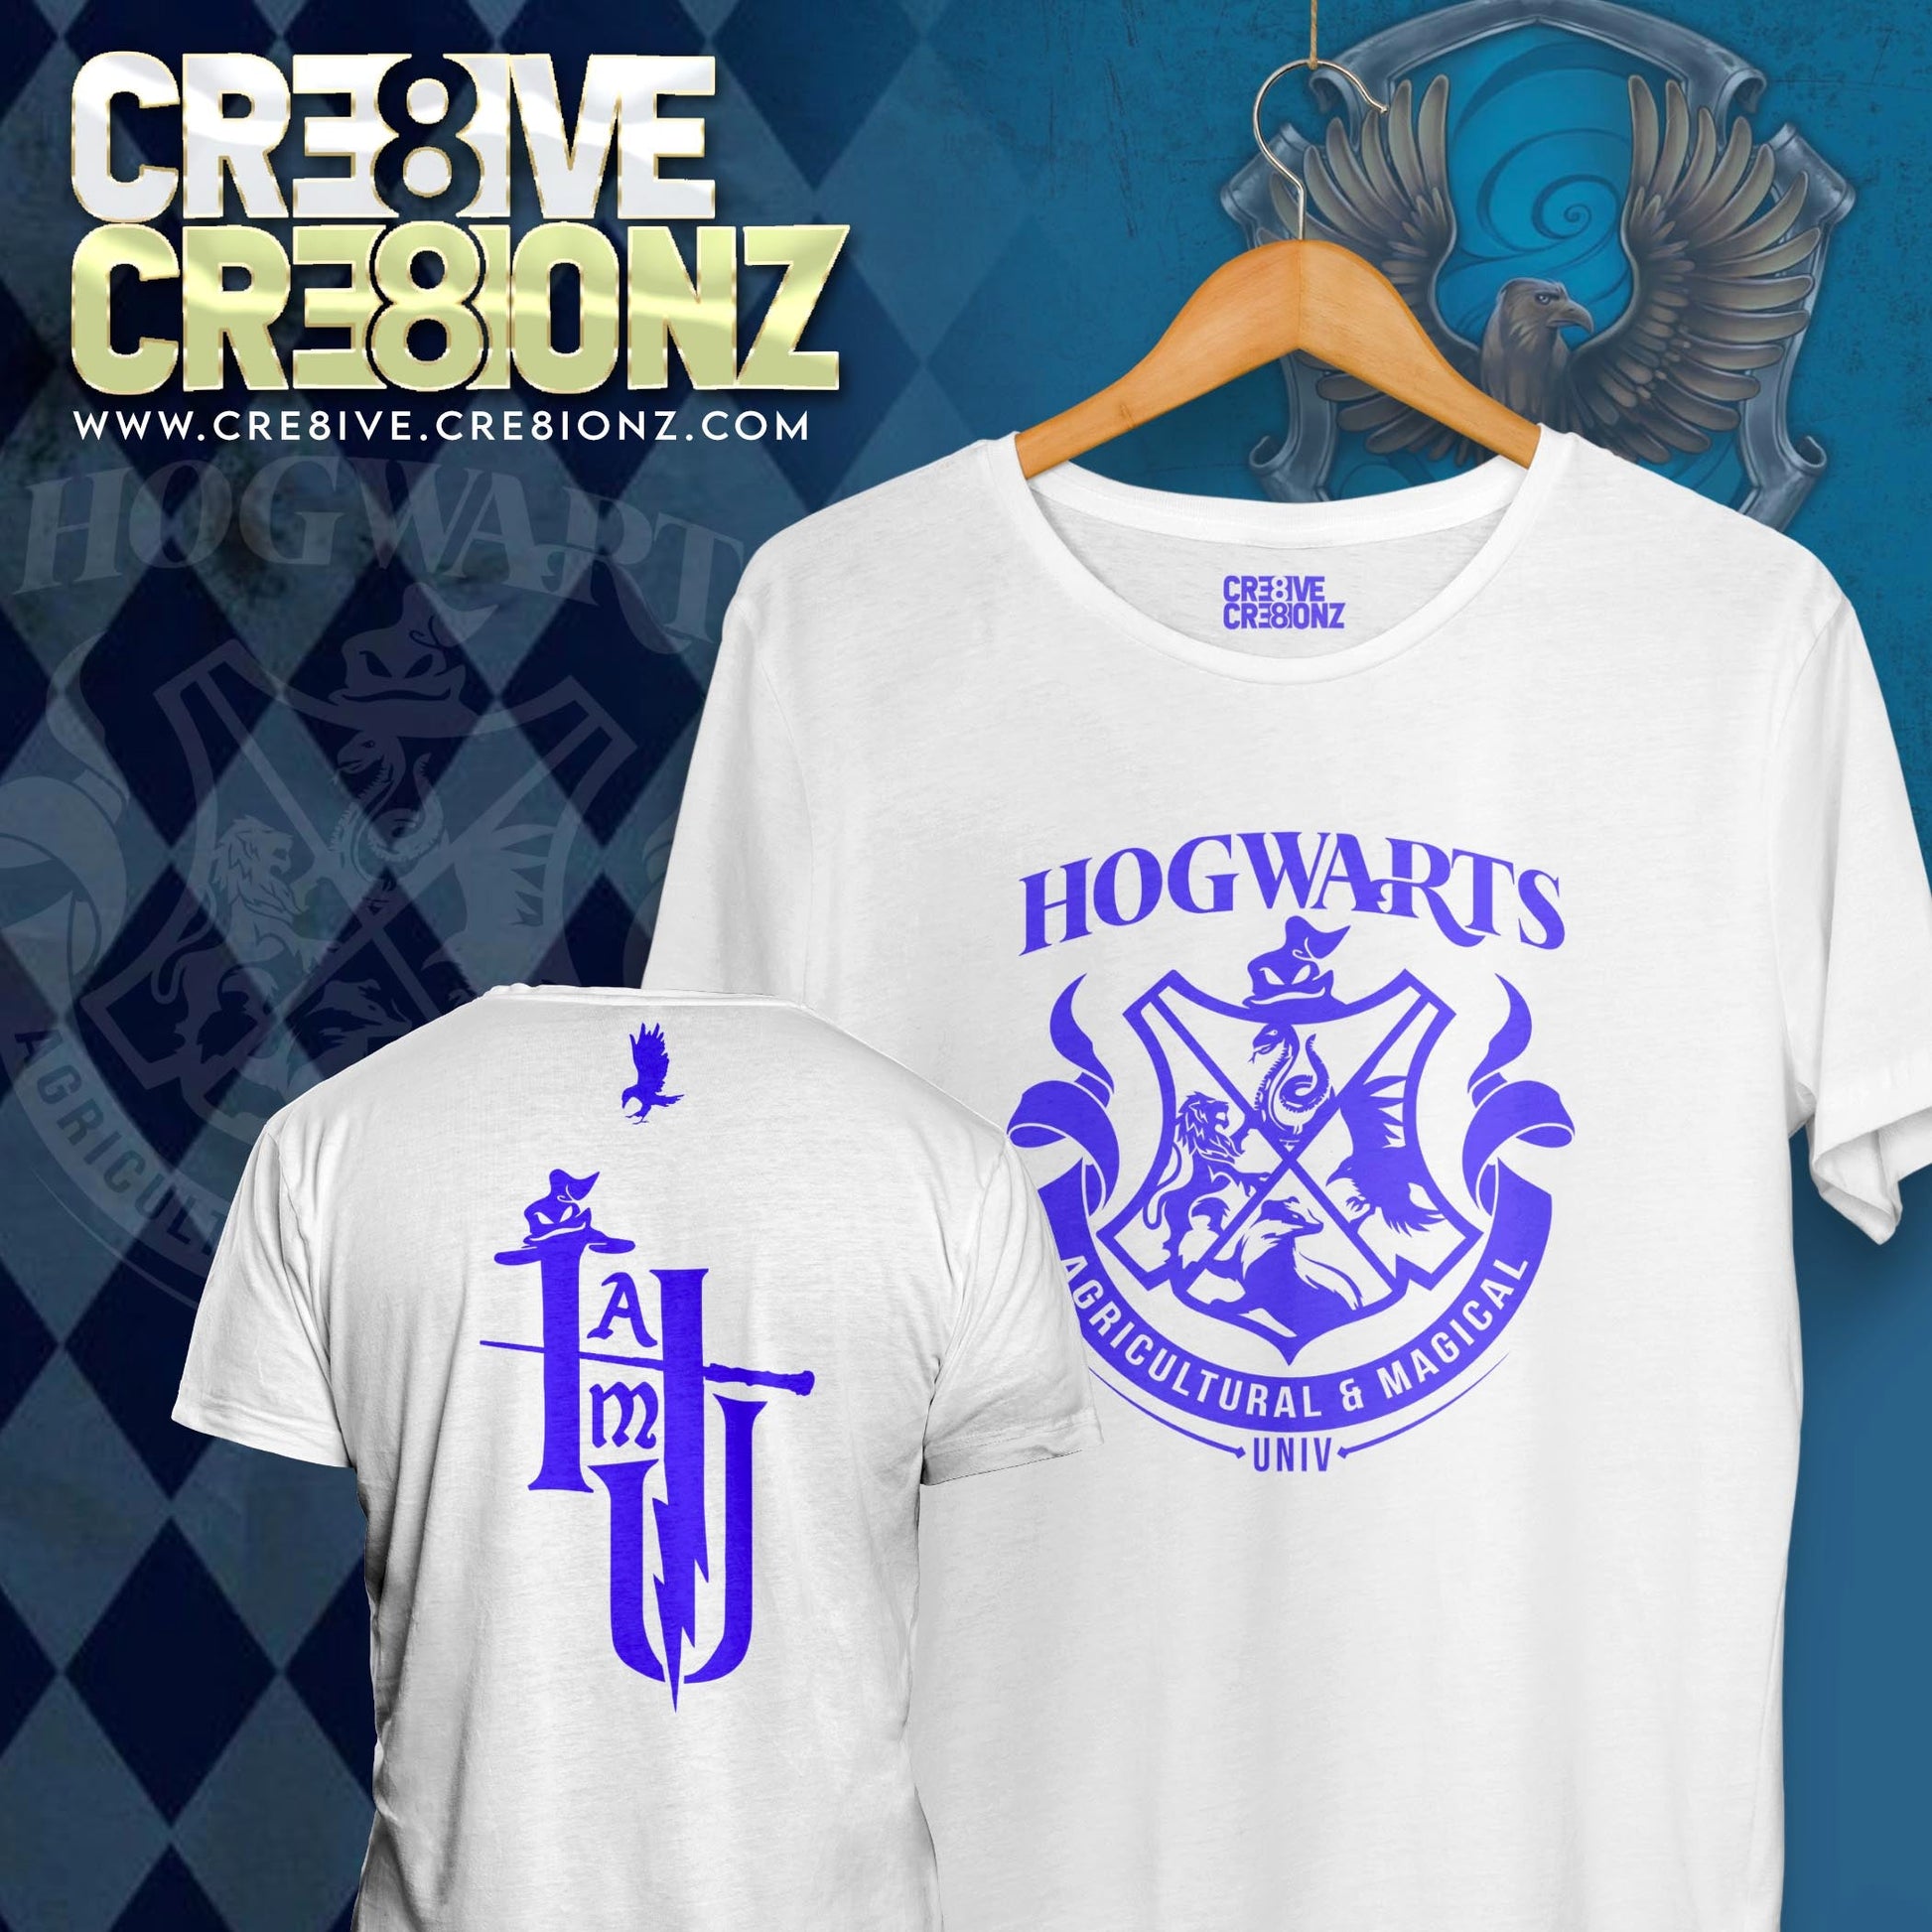 HAMU Ravenclaw Shirt - Cre8ive Cre8ionz